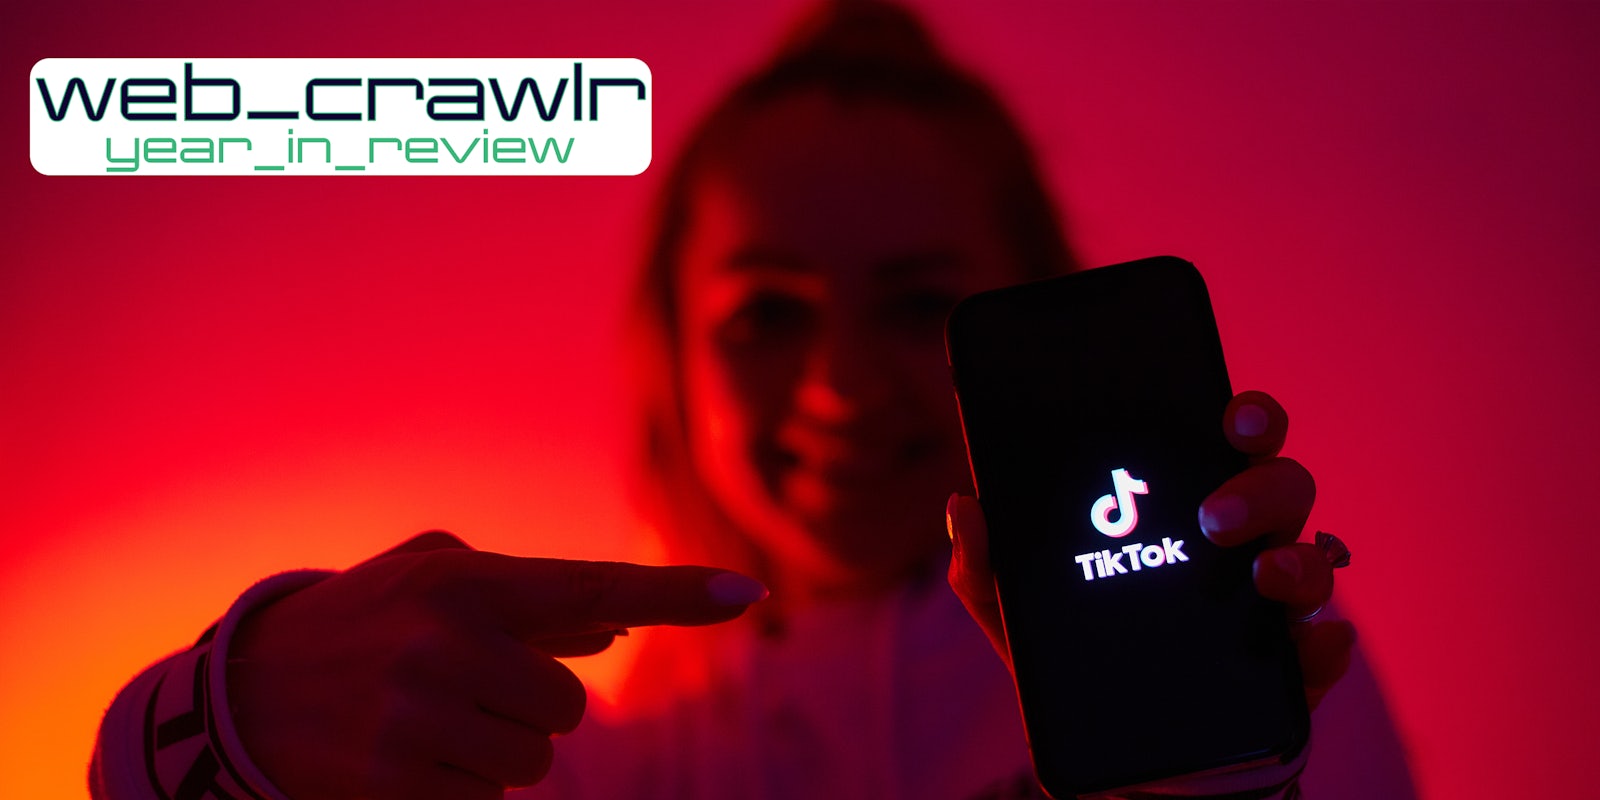 A person holding a phone with the TikTok logo on it while pointing at it. The Daily Dot newsletter web_crawlr logo is in the top left corner.